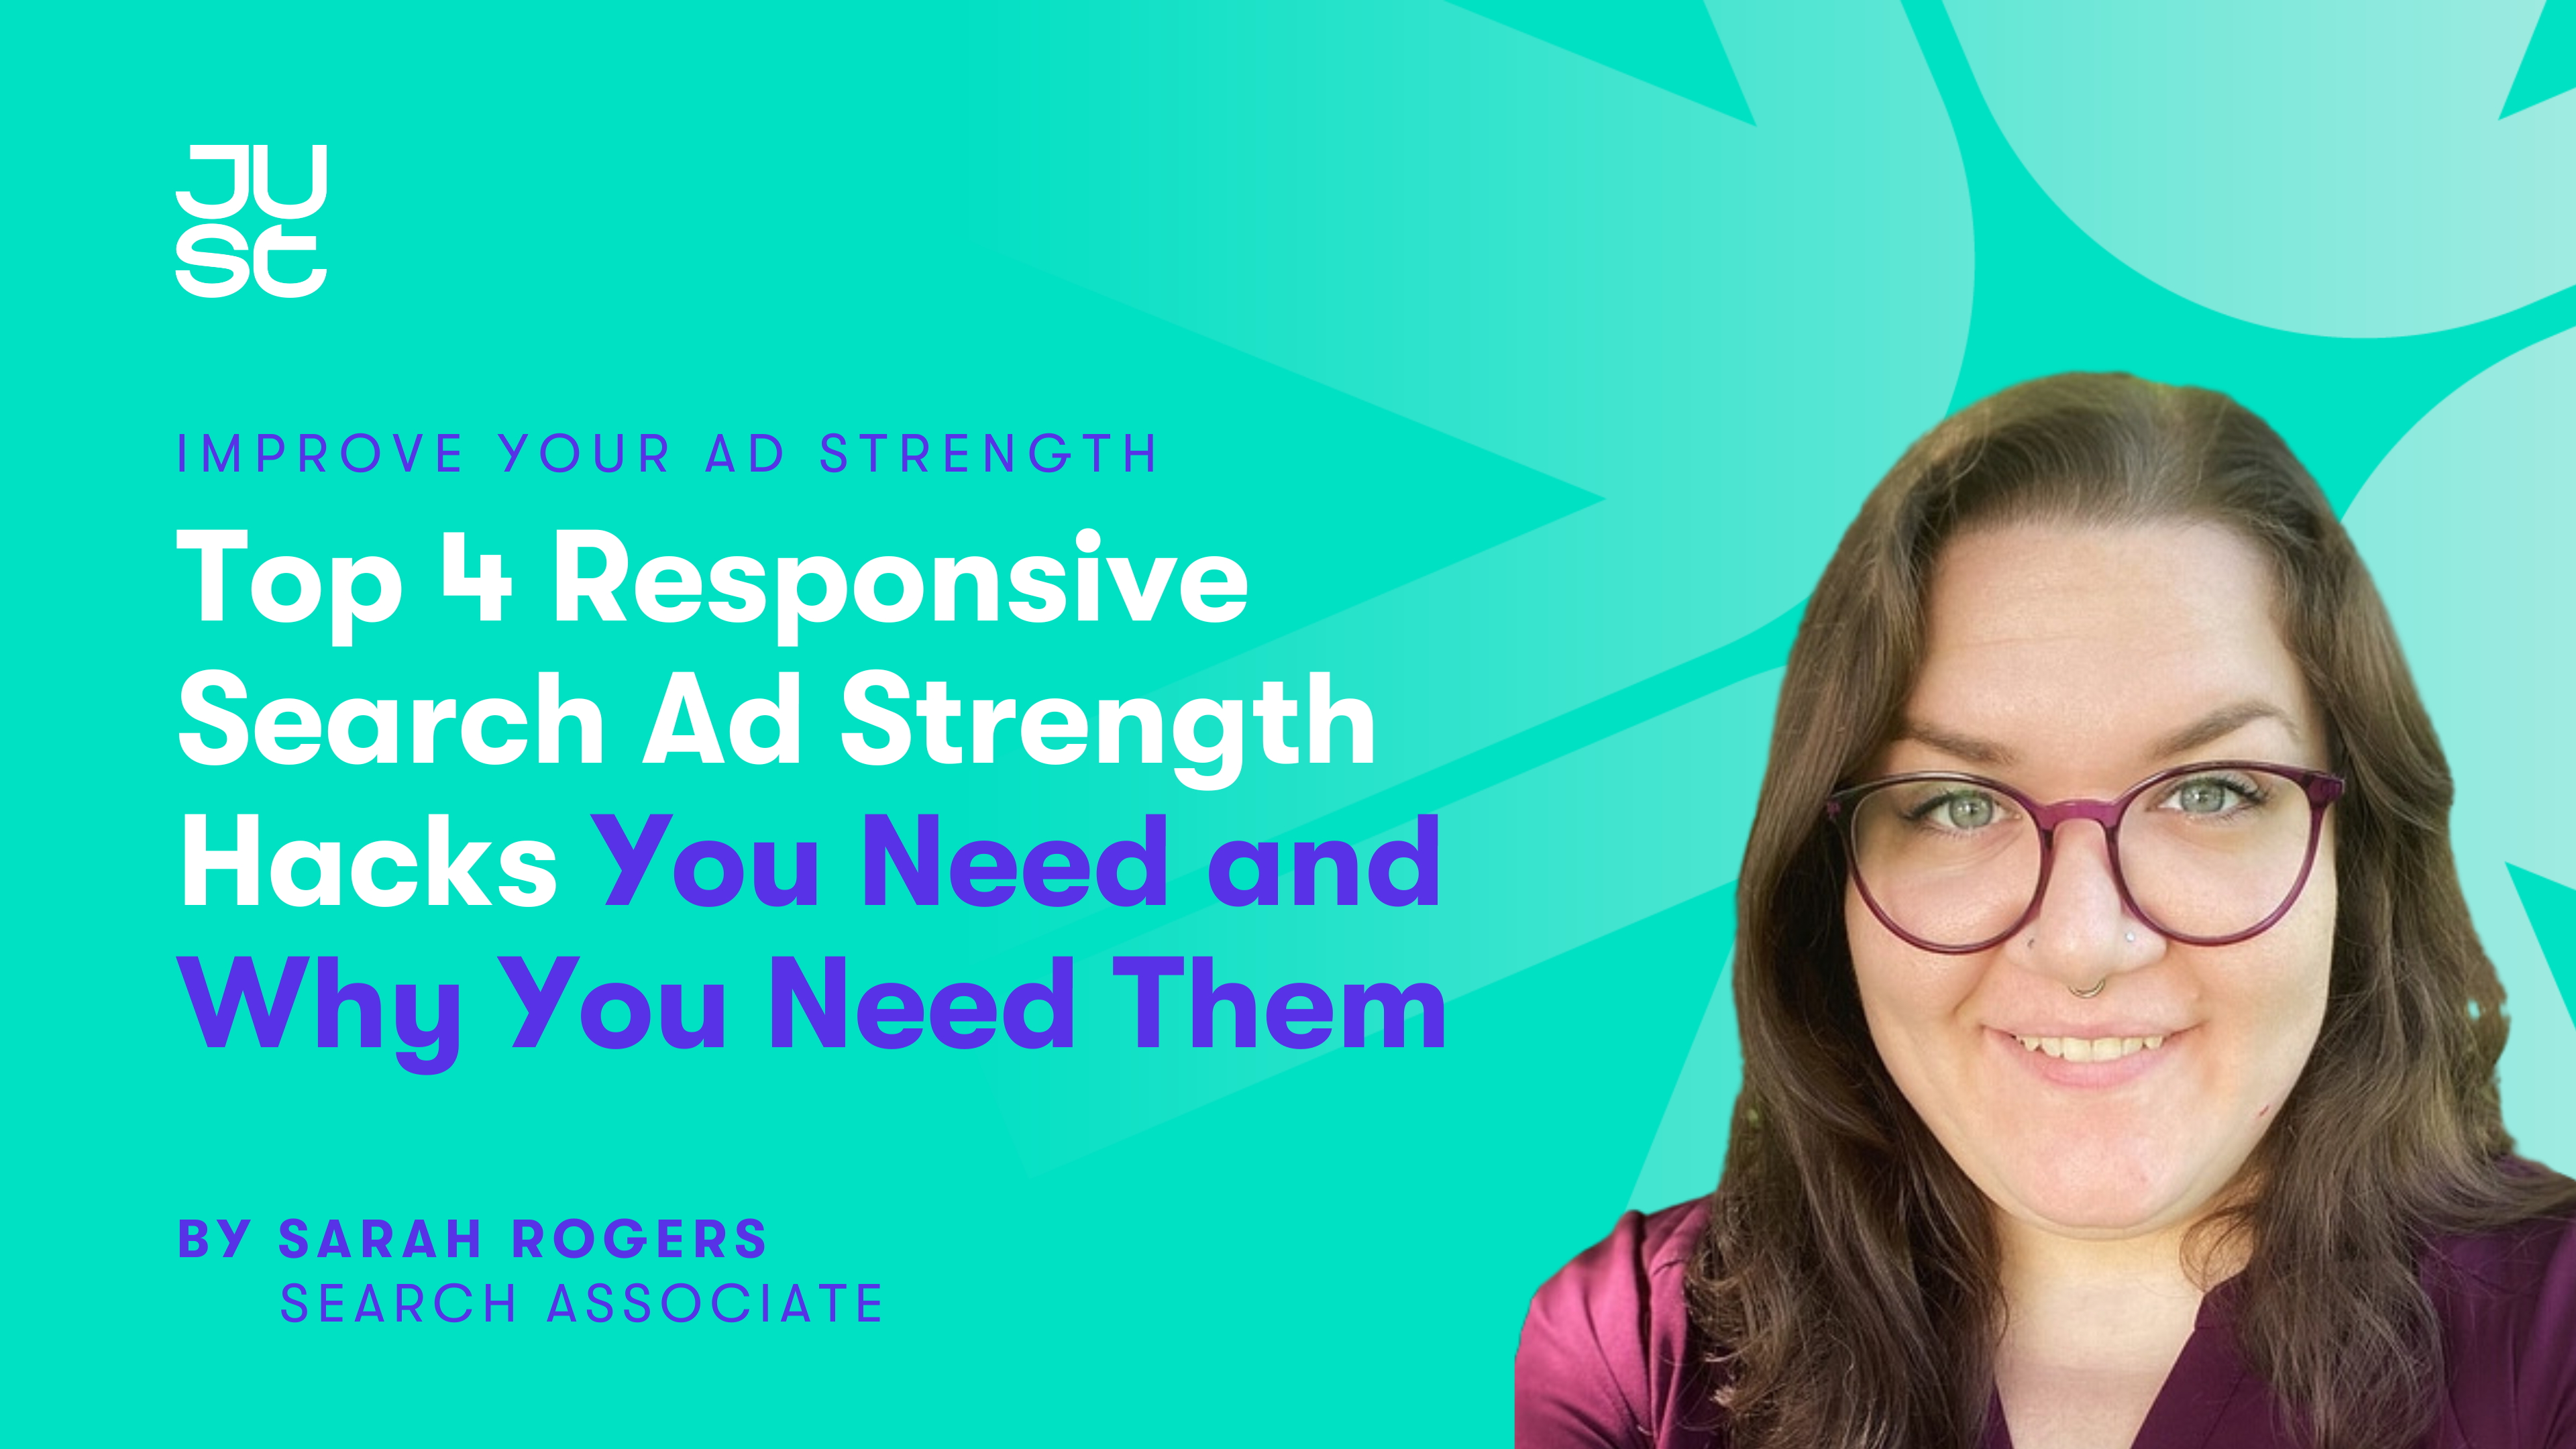 Top 4 Responsive Search Ad Strength Hacks You Need and Why You Need Them Featured Image